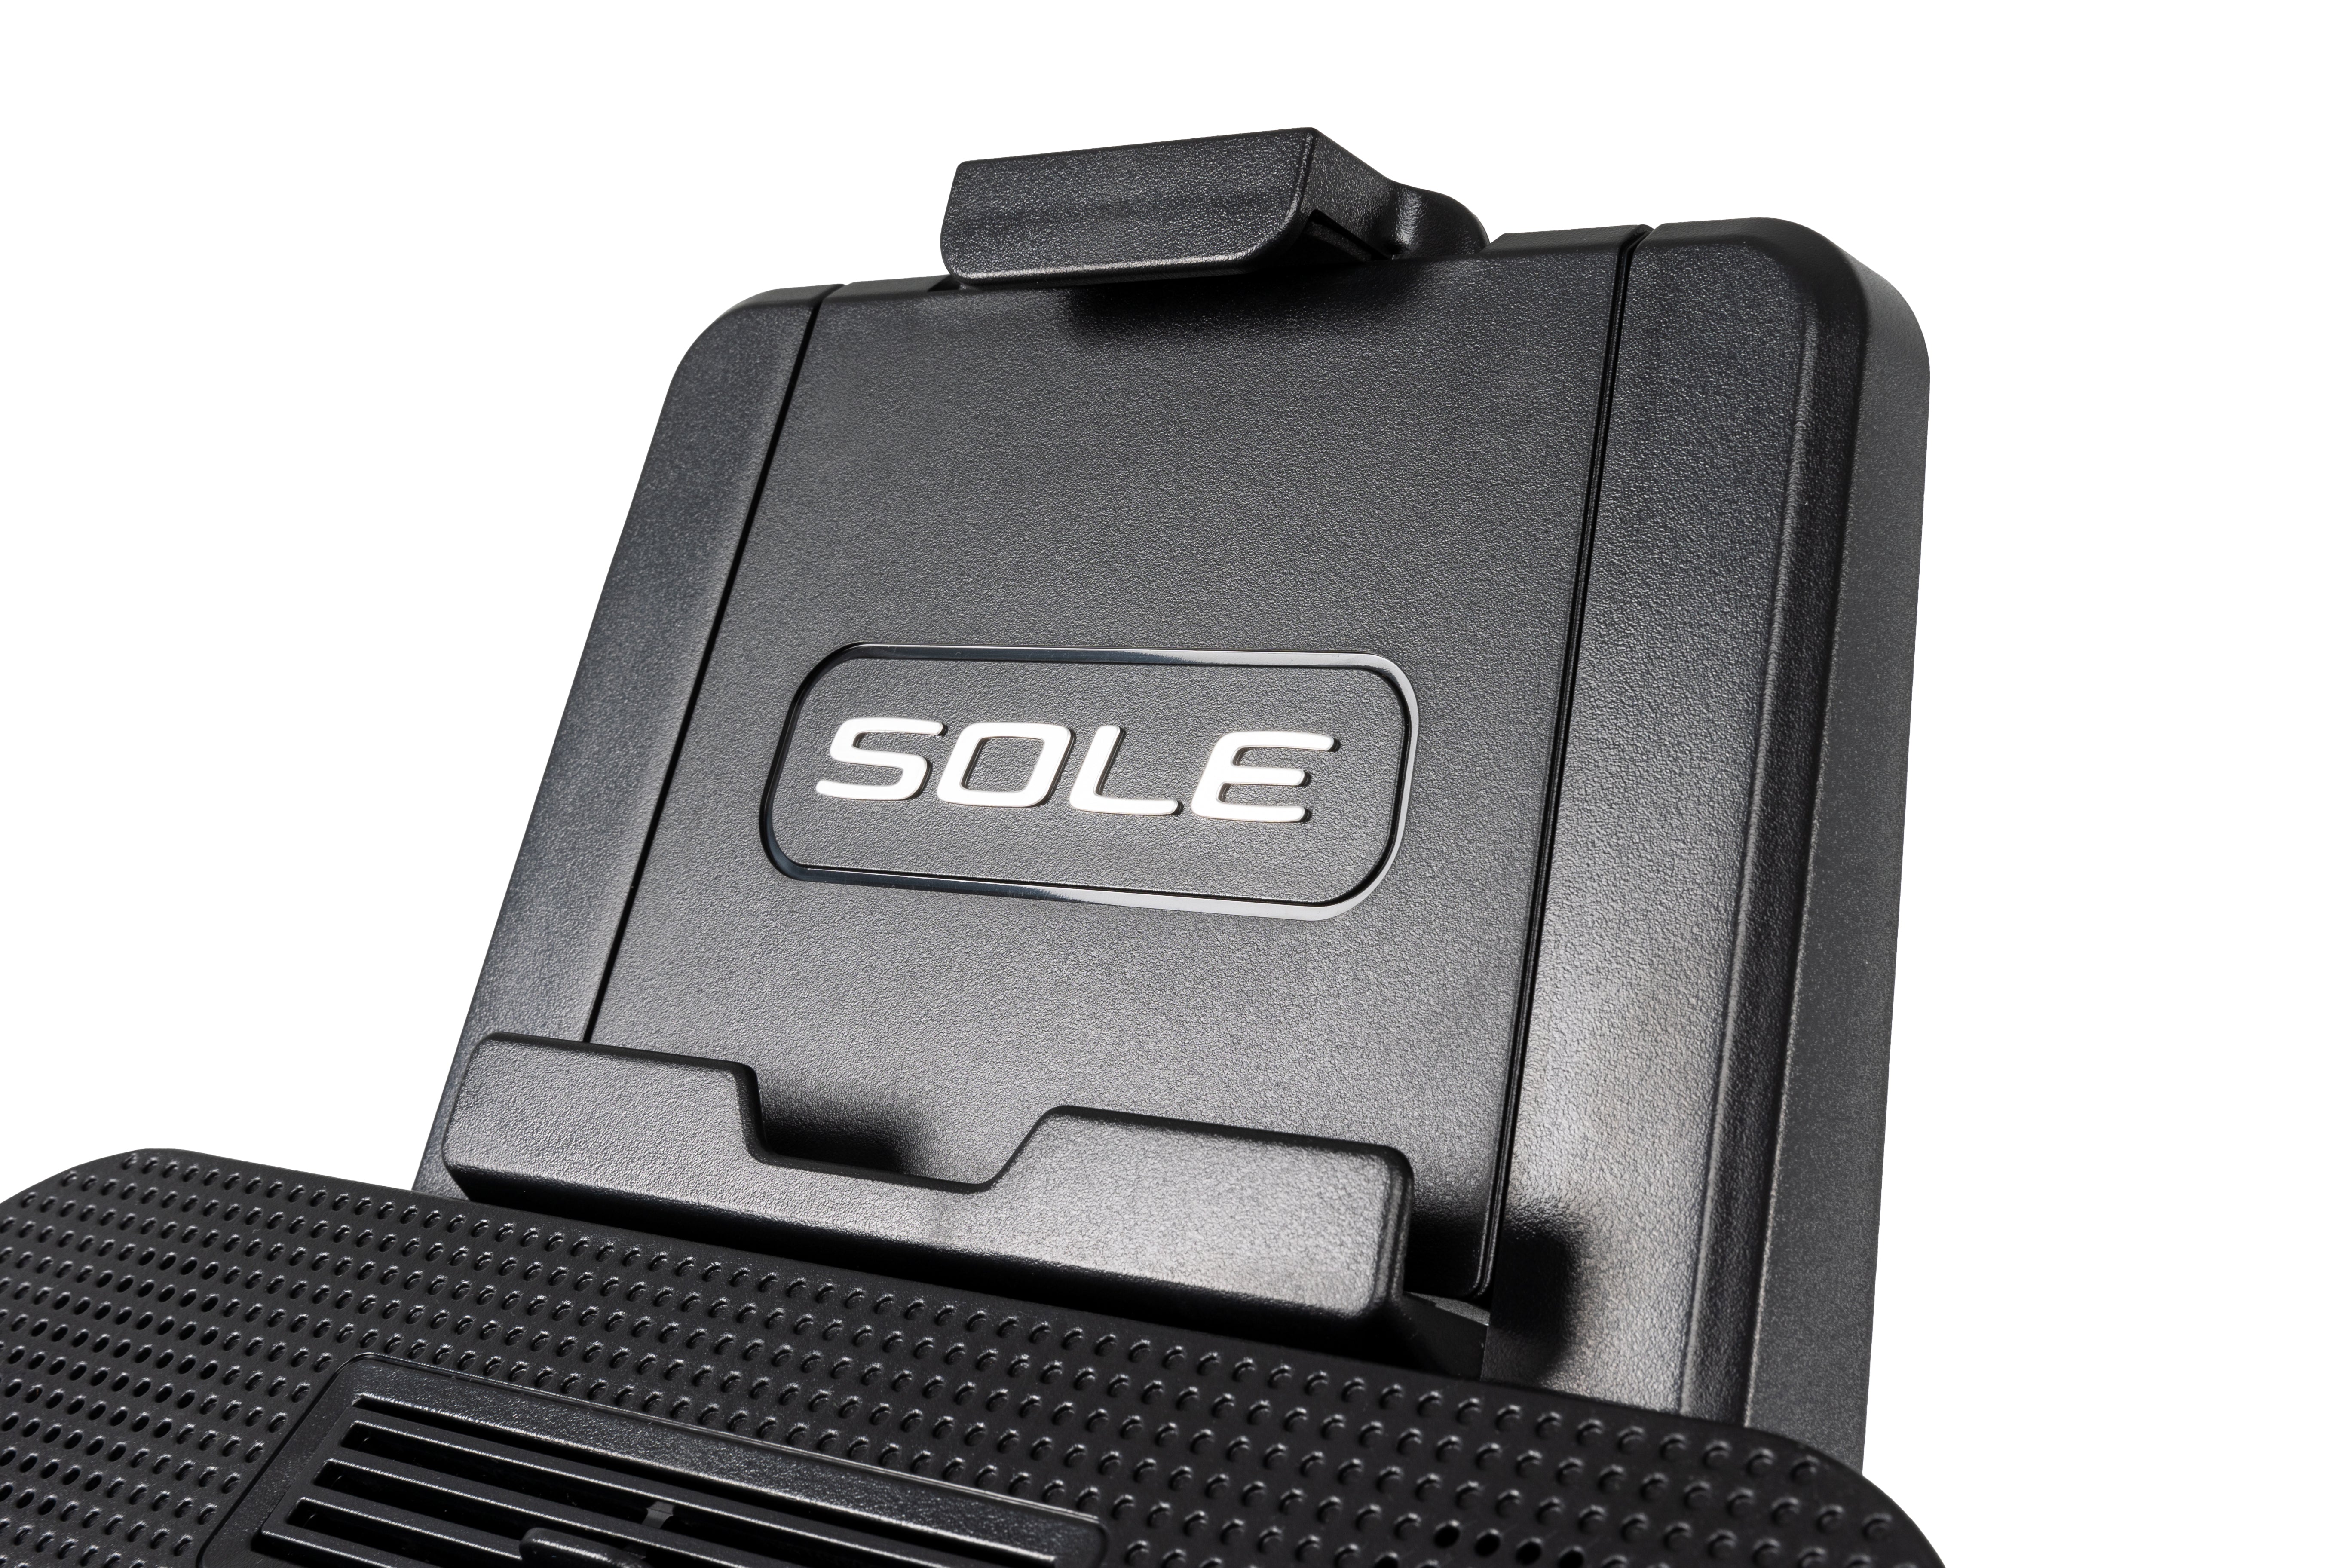 Detail view of the Sole B94's top section, highlighting the tablet holder embossed 'SOLE' logo on a textured dark surface, with an adjacent ventilation grate.